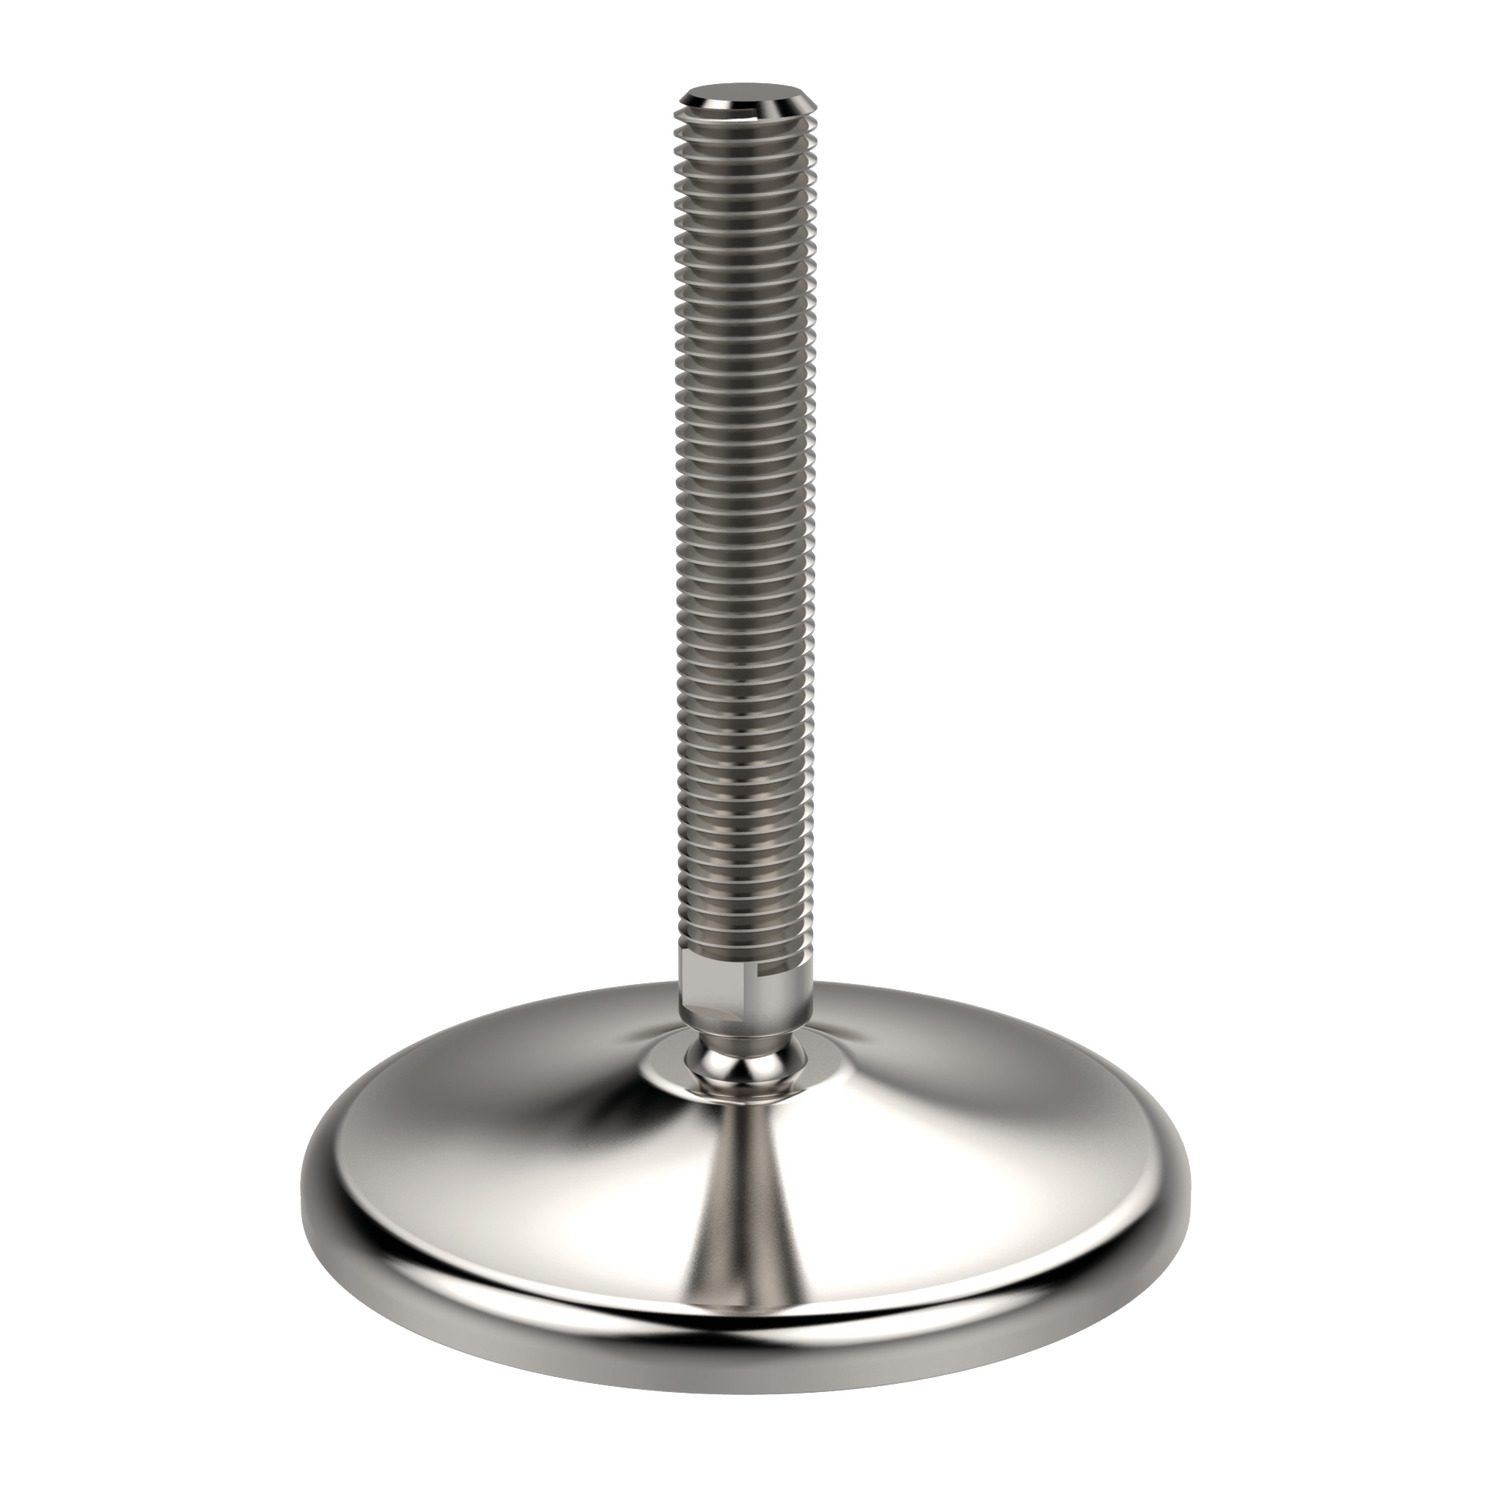 Levelling Feet Heavy duty stainless steel (AISI 304 with AISI 316 available on request) with a rubber grip pad (70 Shore A). Thread bolt allows for 30° articulation of the foot.